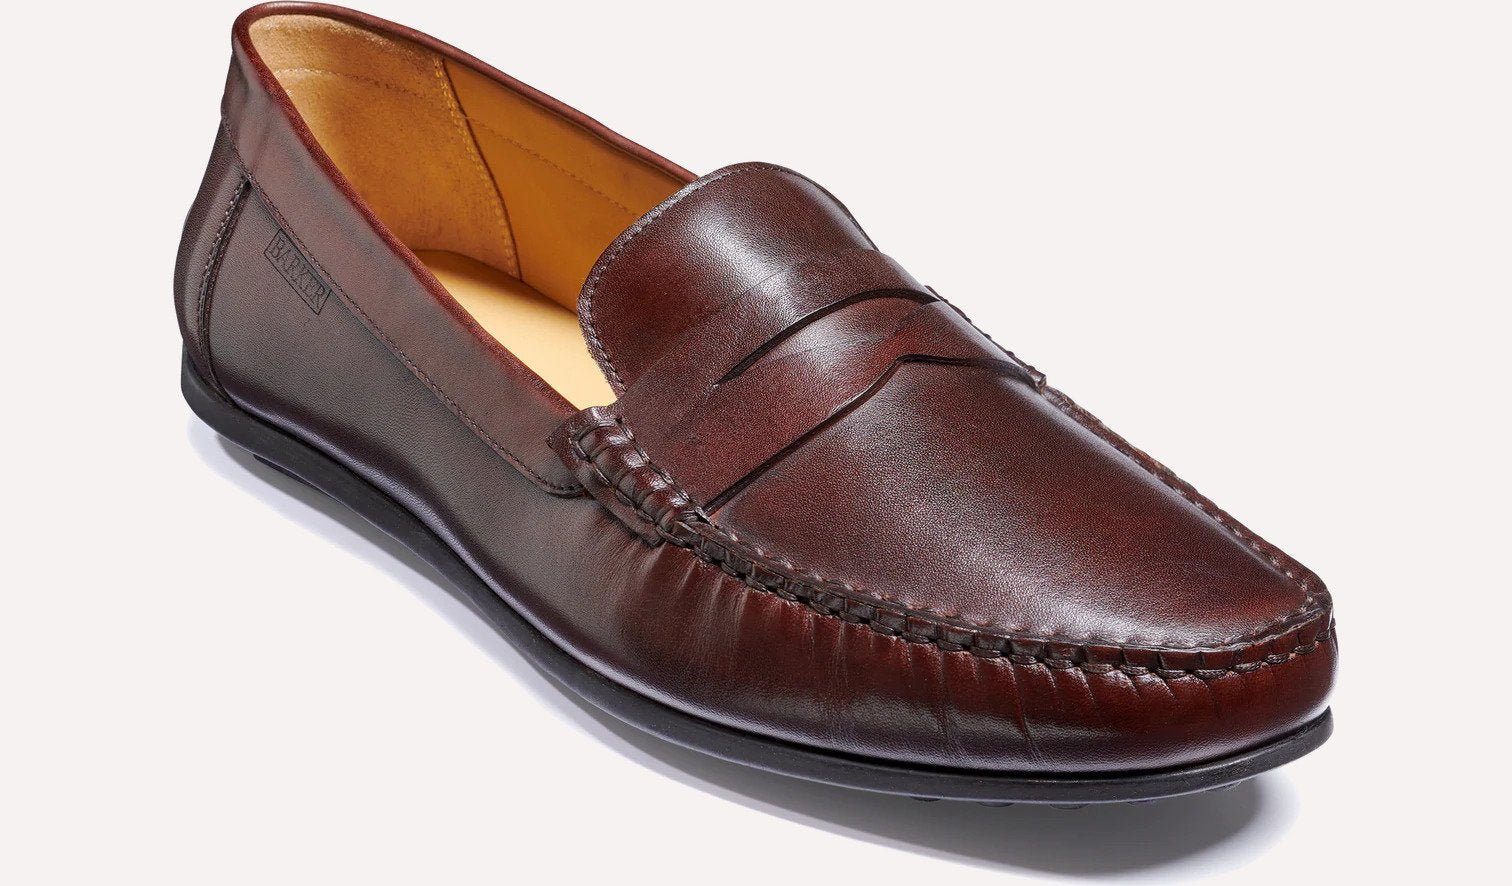 Barker Jamie Loafers Shoe -  Chestnut Hand Painted